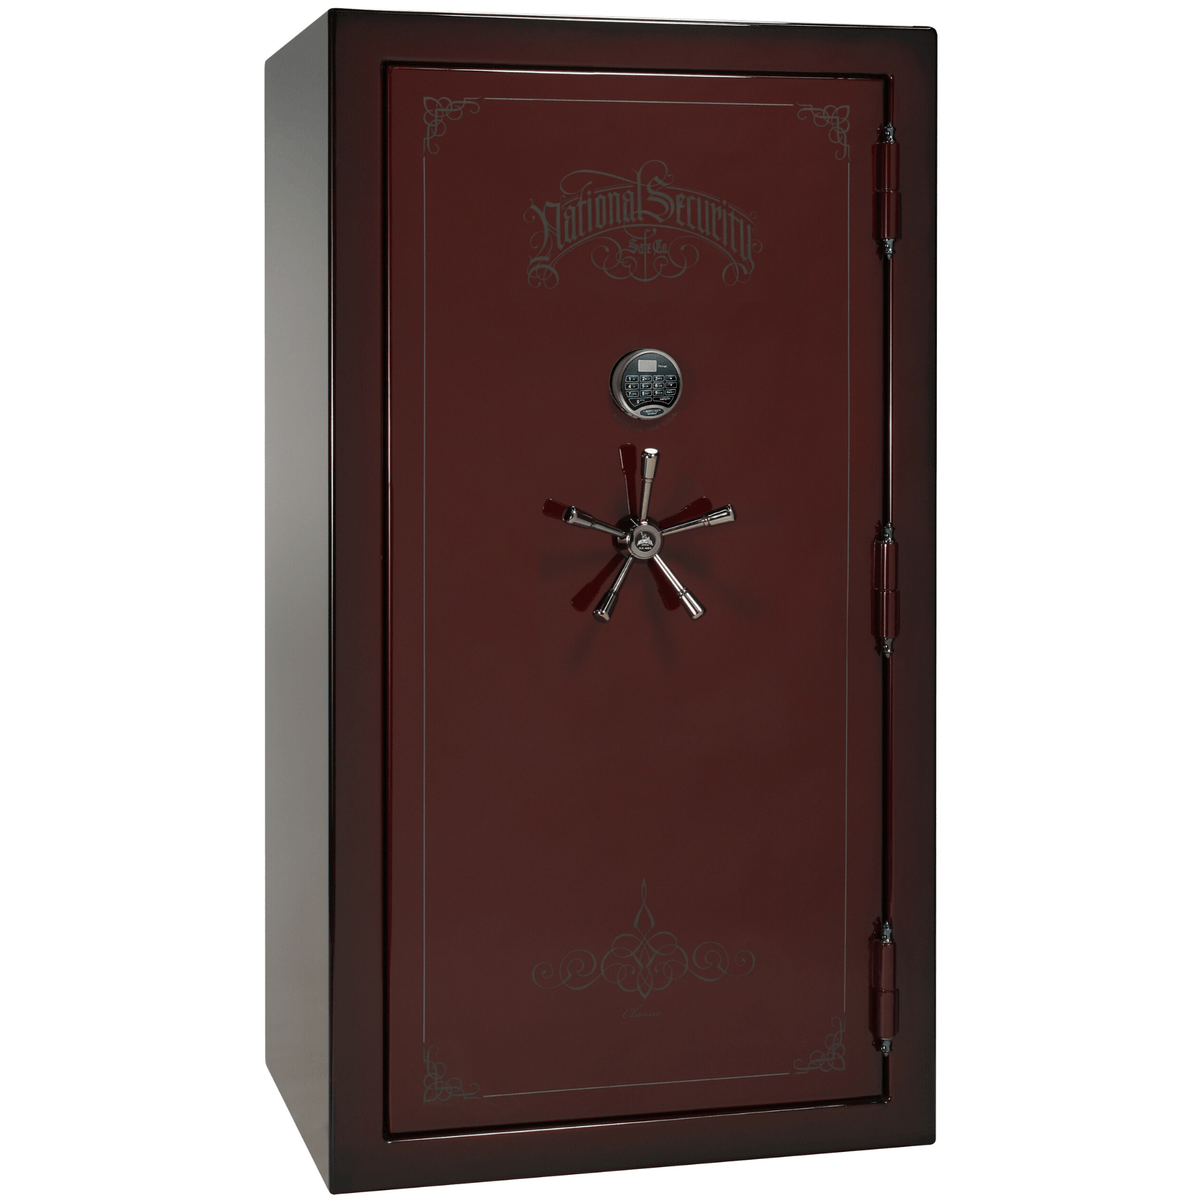 Liberty Safe Classic Plus 40 in Feathered Burgundy Gloss with Black Chrome Electronic Lock, closed door.